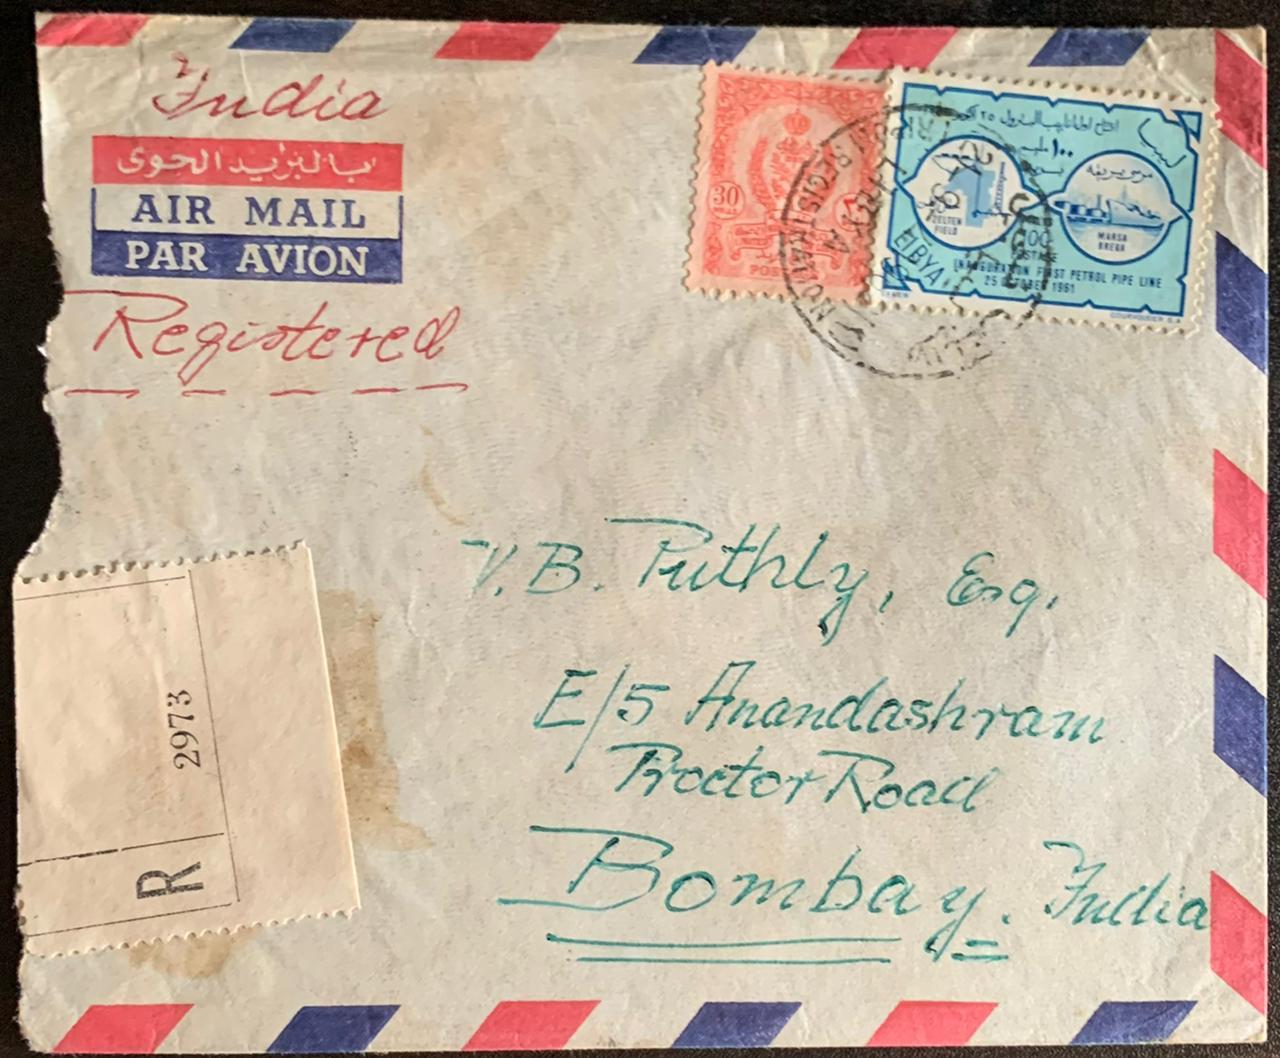 Libya 1980 Registered Cover to Bombay India